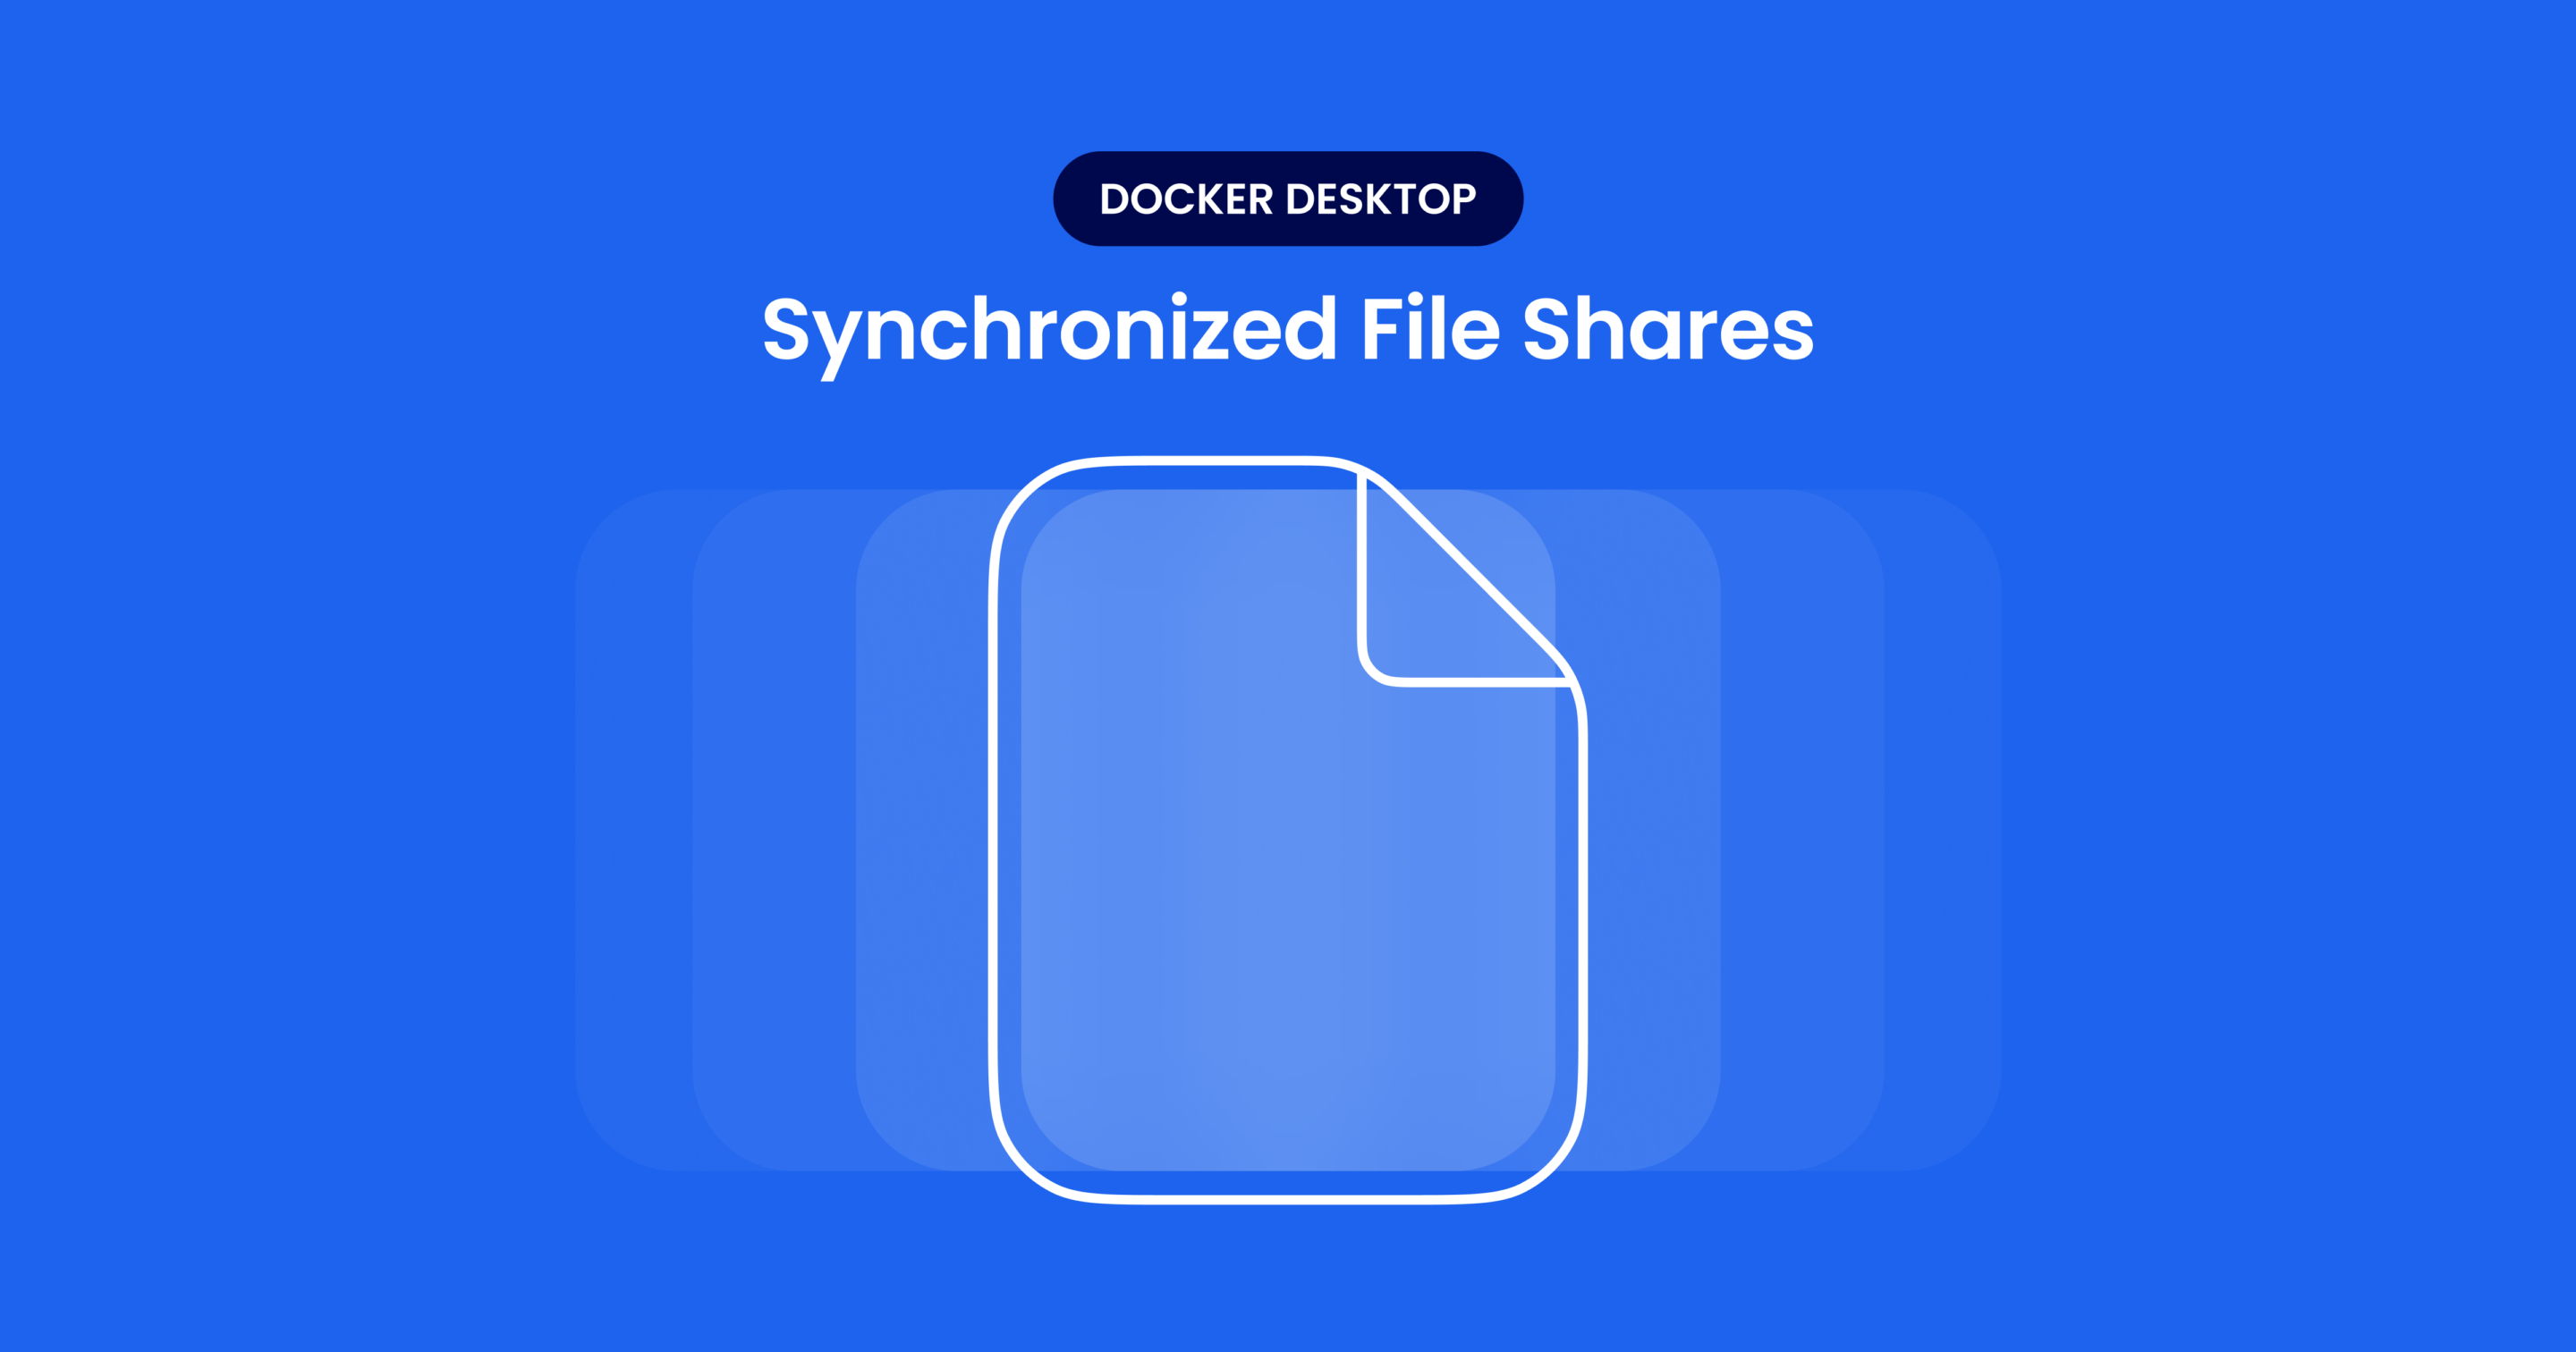 See 2-10x Faster File Operation Speeds with Synchronized File Shares in Docker Desktop